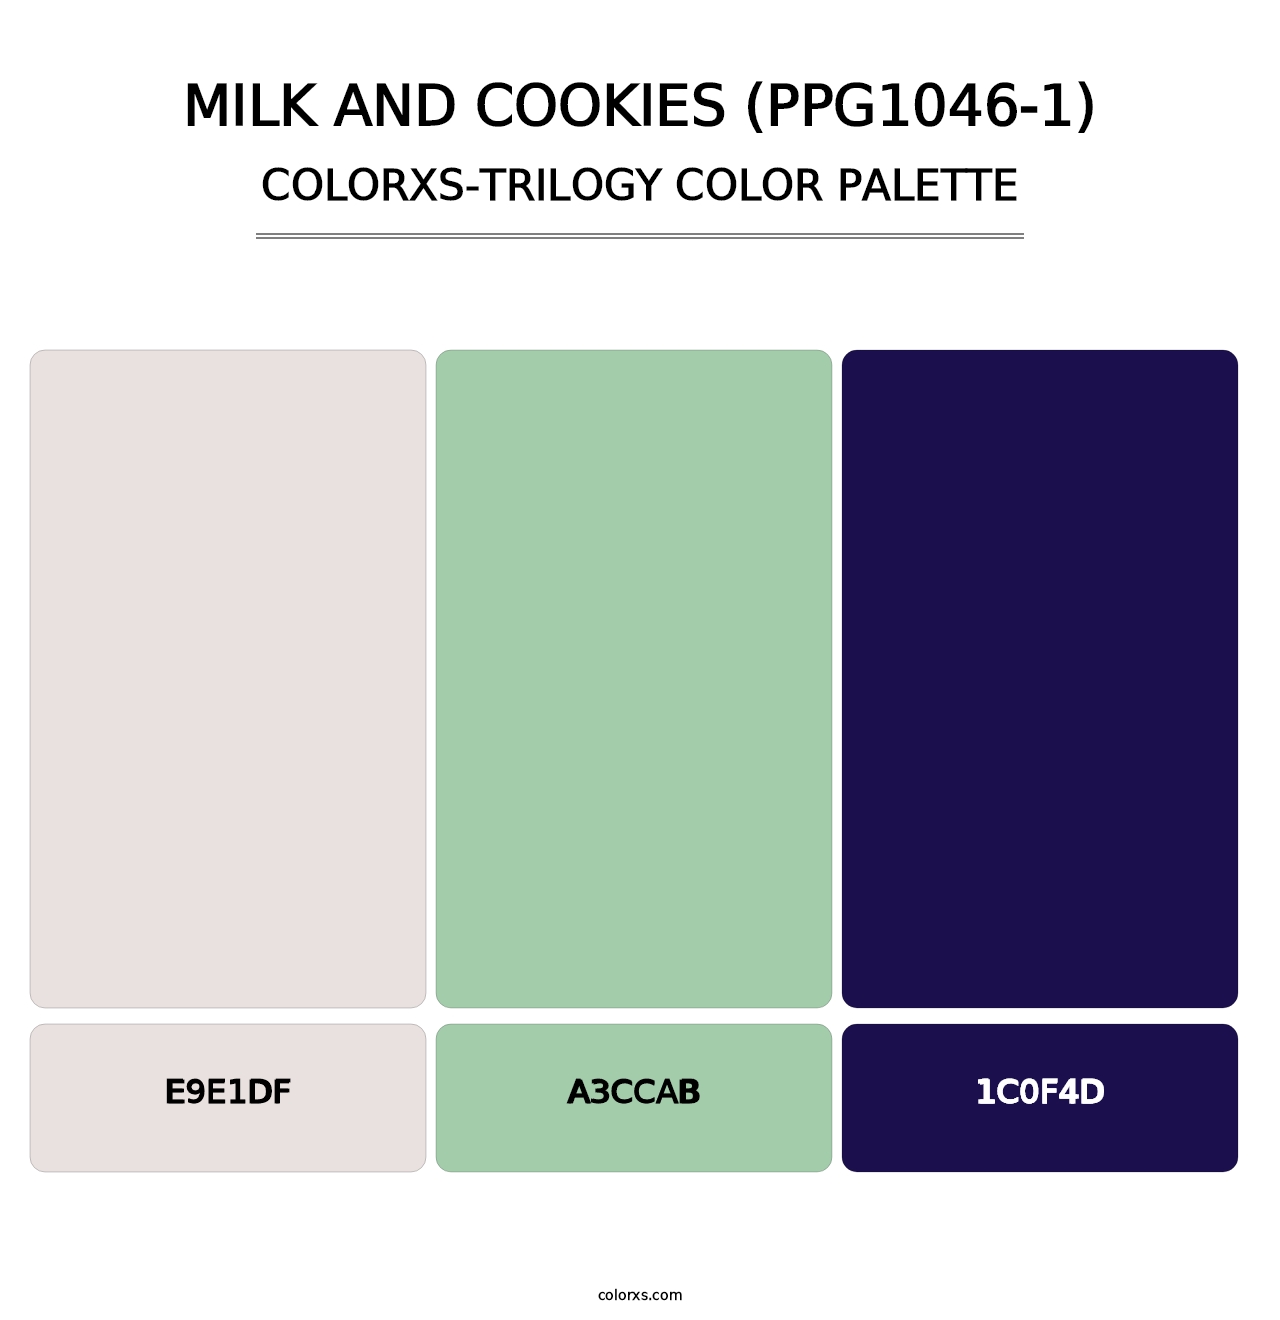 Milk And Cookies (PPG1046-1) - Colorxs Trilogy Palette